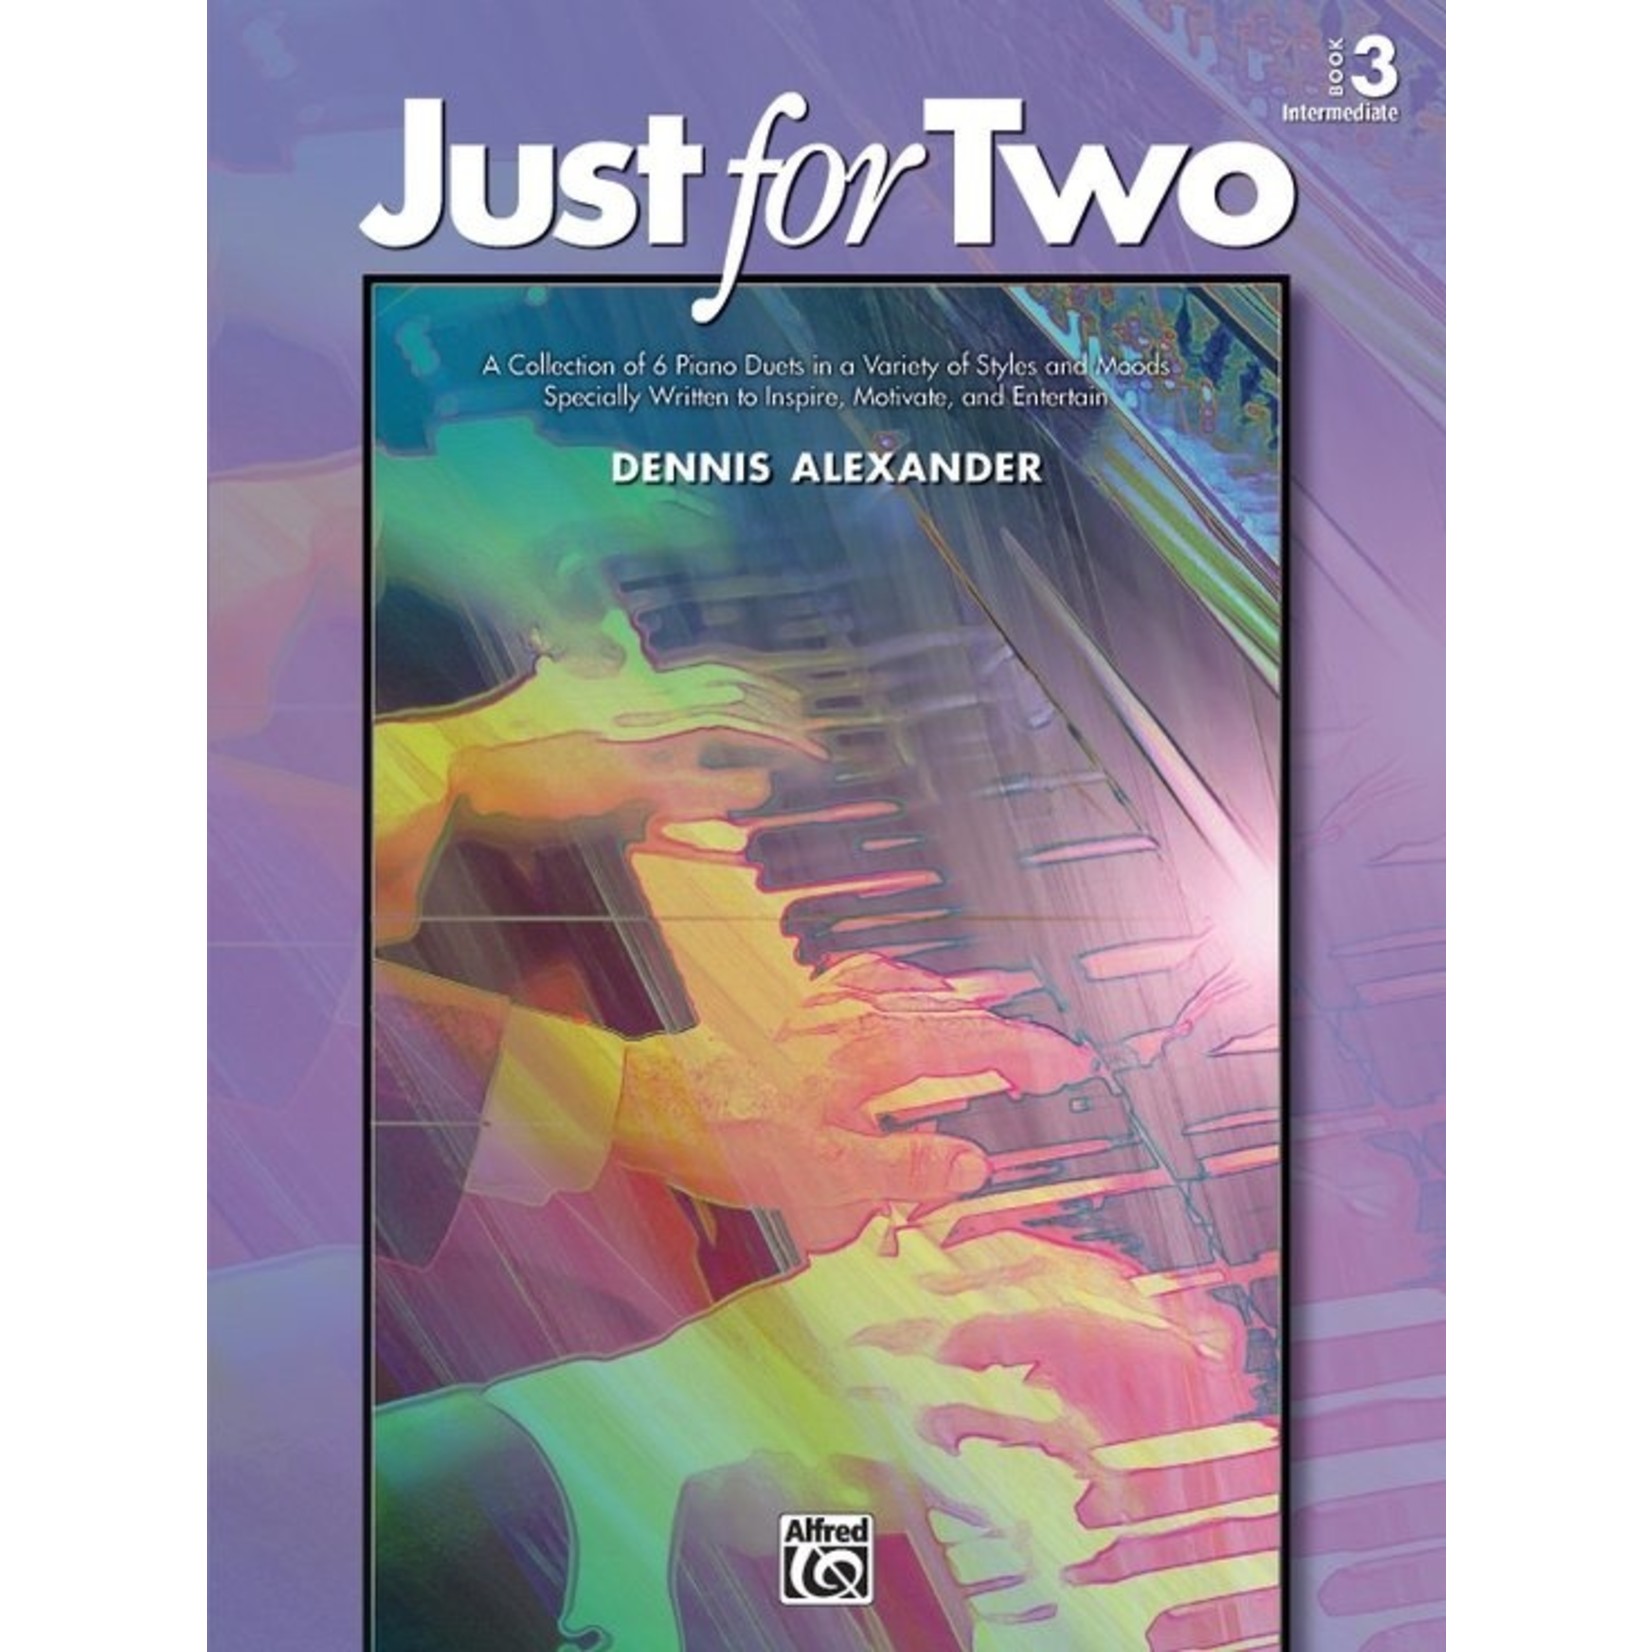 Alfred Just for Two, Book 3 A Collection of 6 Piano Duets in a Variety of Styles and Moods Specially Written to Inspire, Motivate, and Entertain